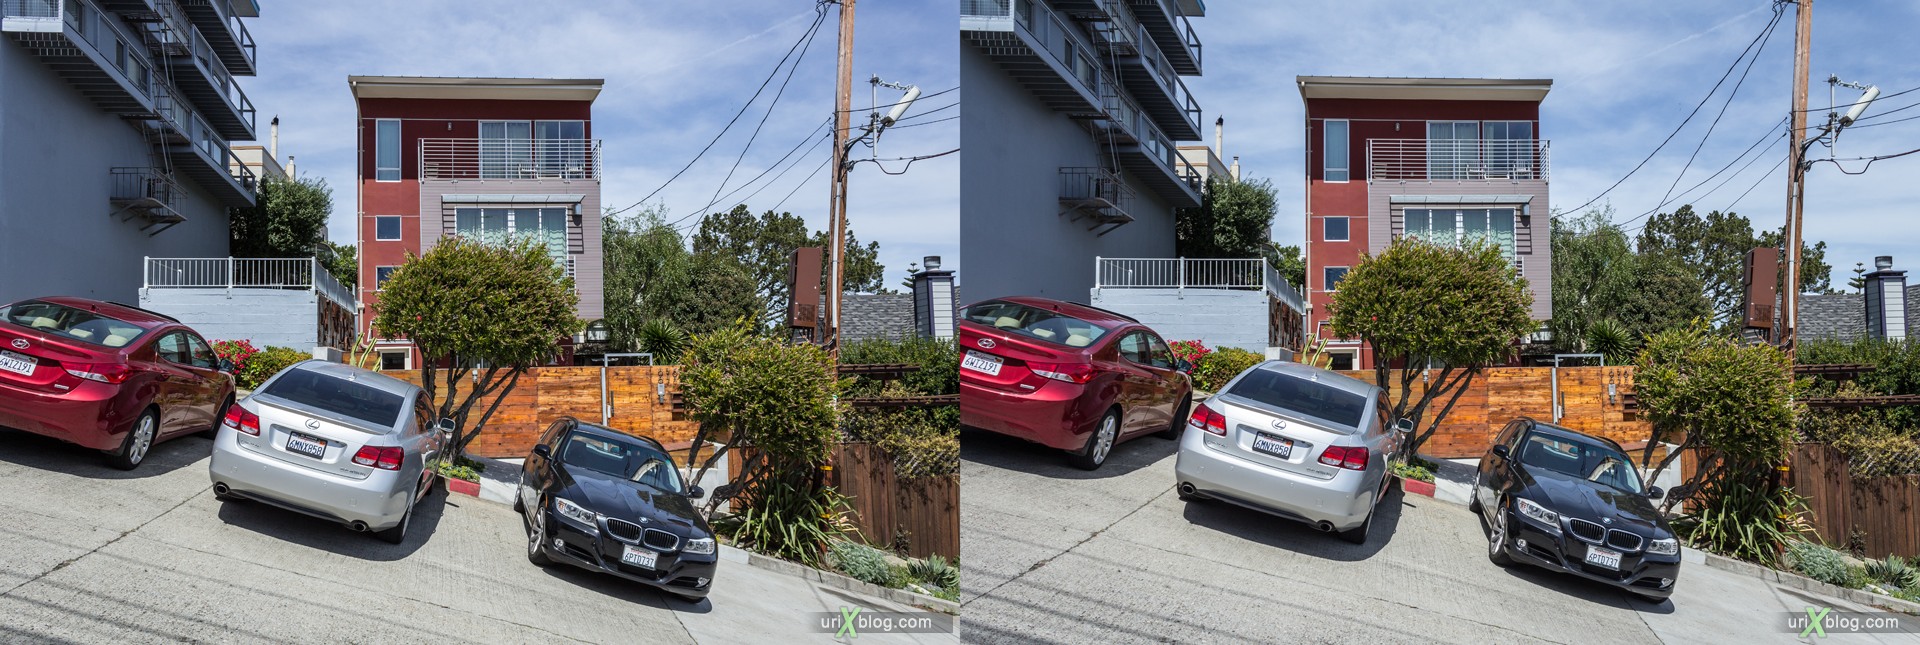 2013, Castro, Dolores Heights, San Francisco, USA, 3D, stereo pair, cross-eyed, crossview, cross view stereo pair, stereoscopic